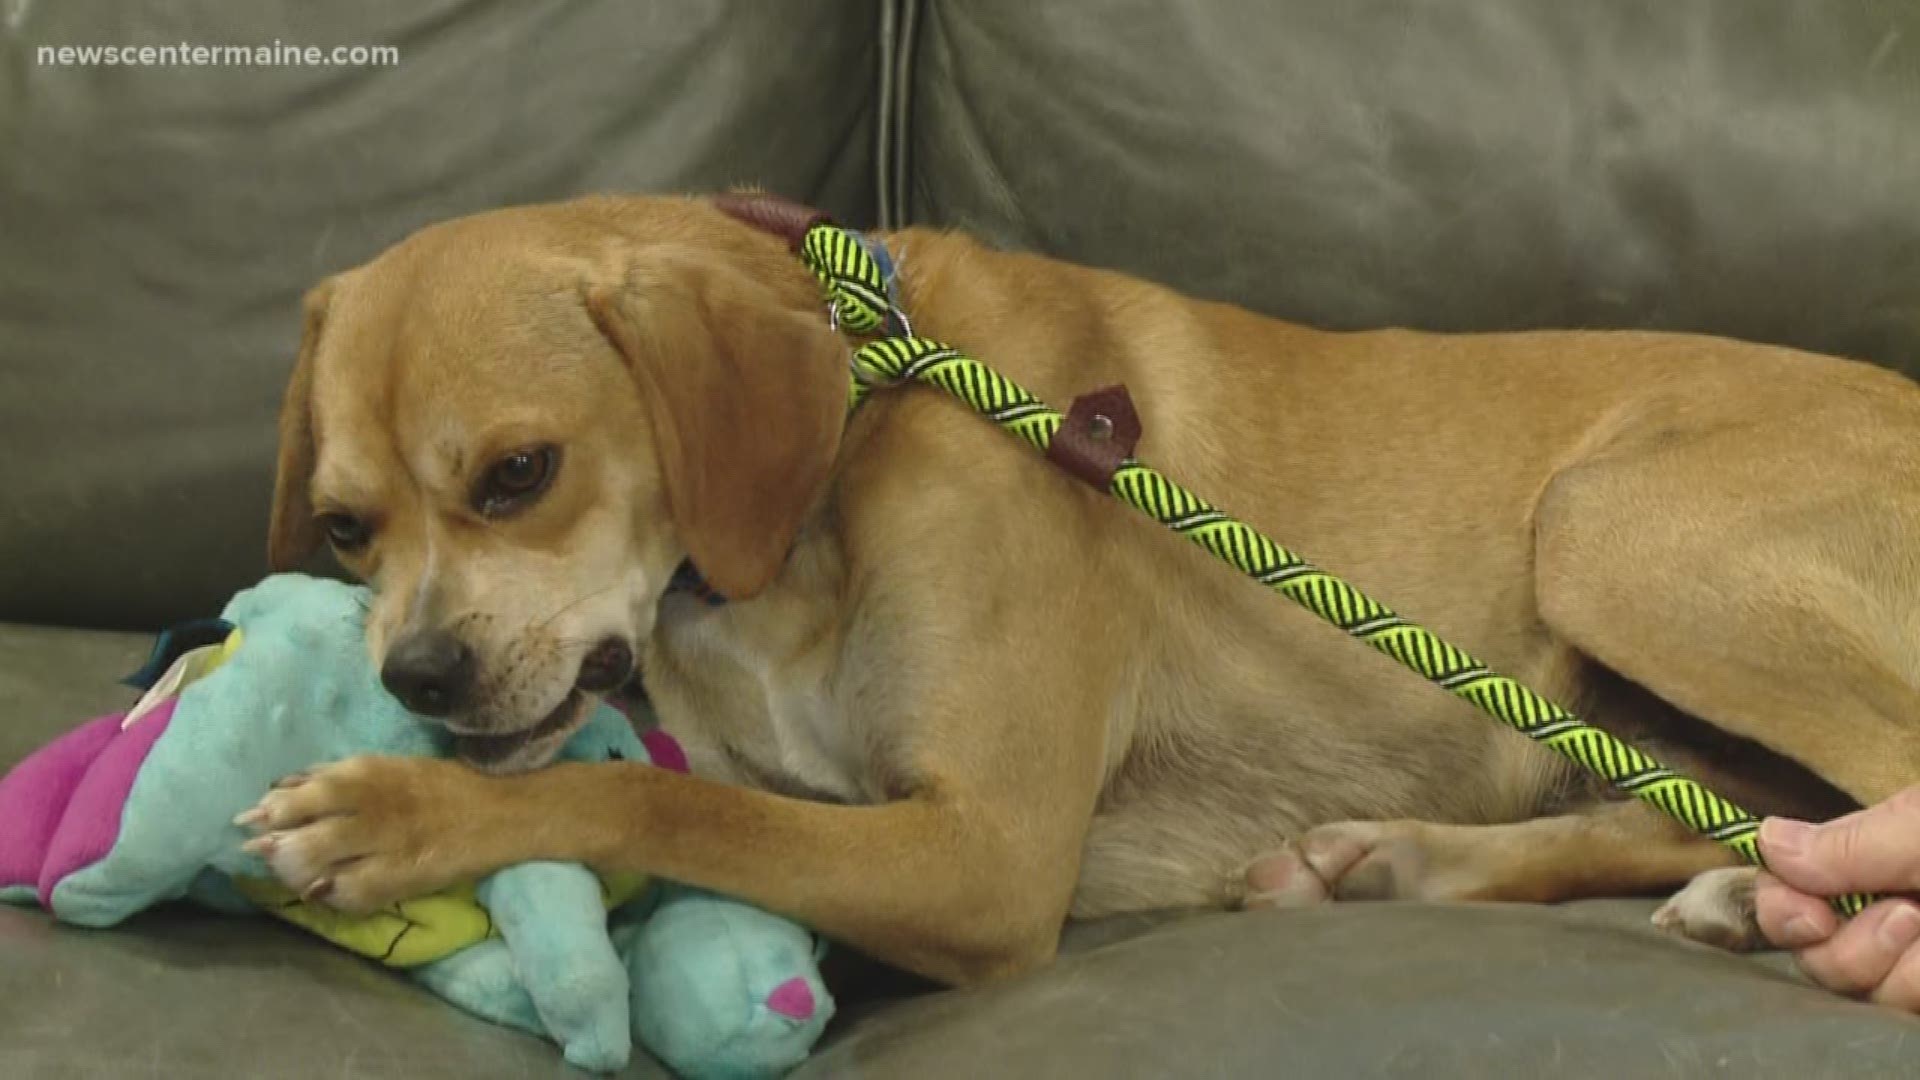 Chappy the puppy puggle is up for adoption at NFR Maine